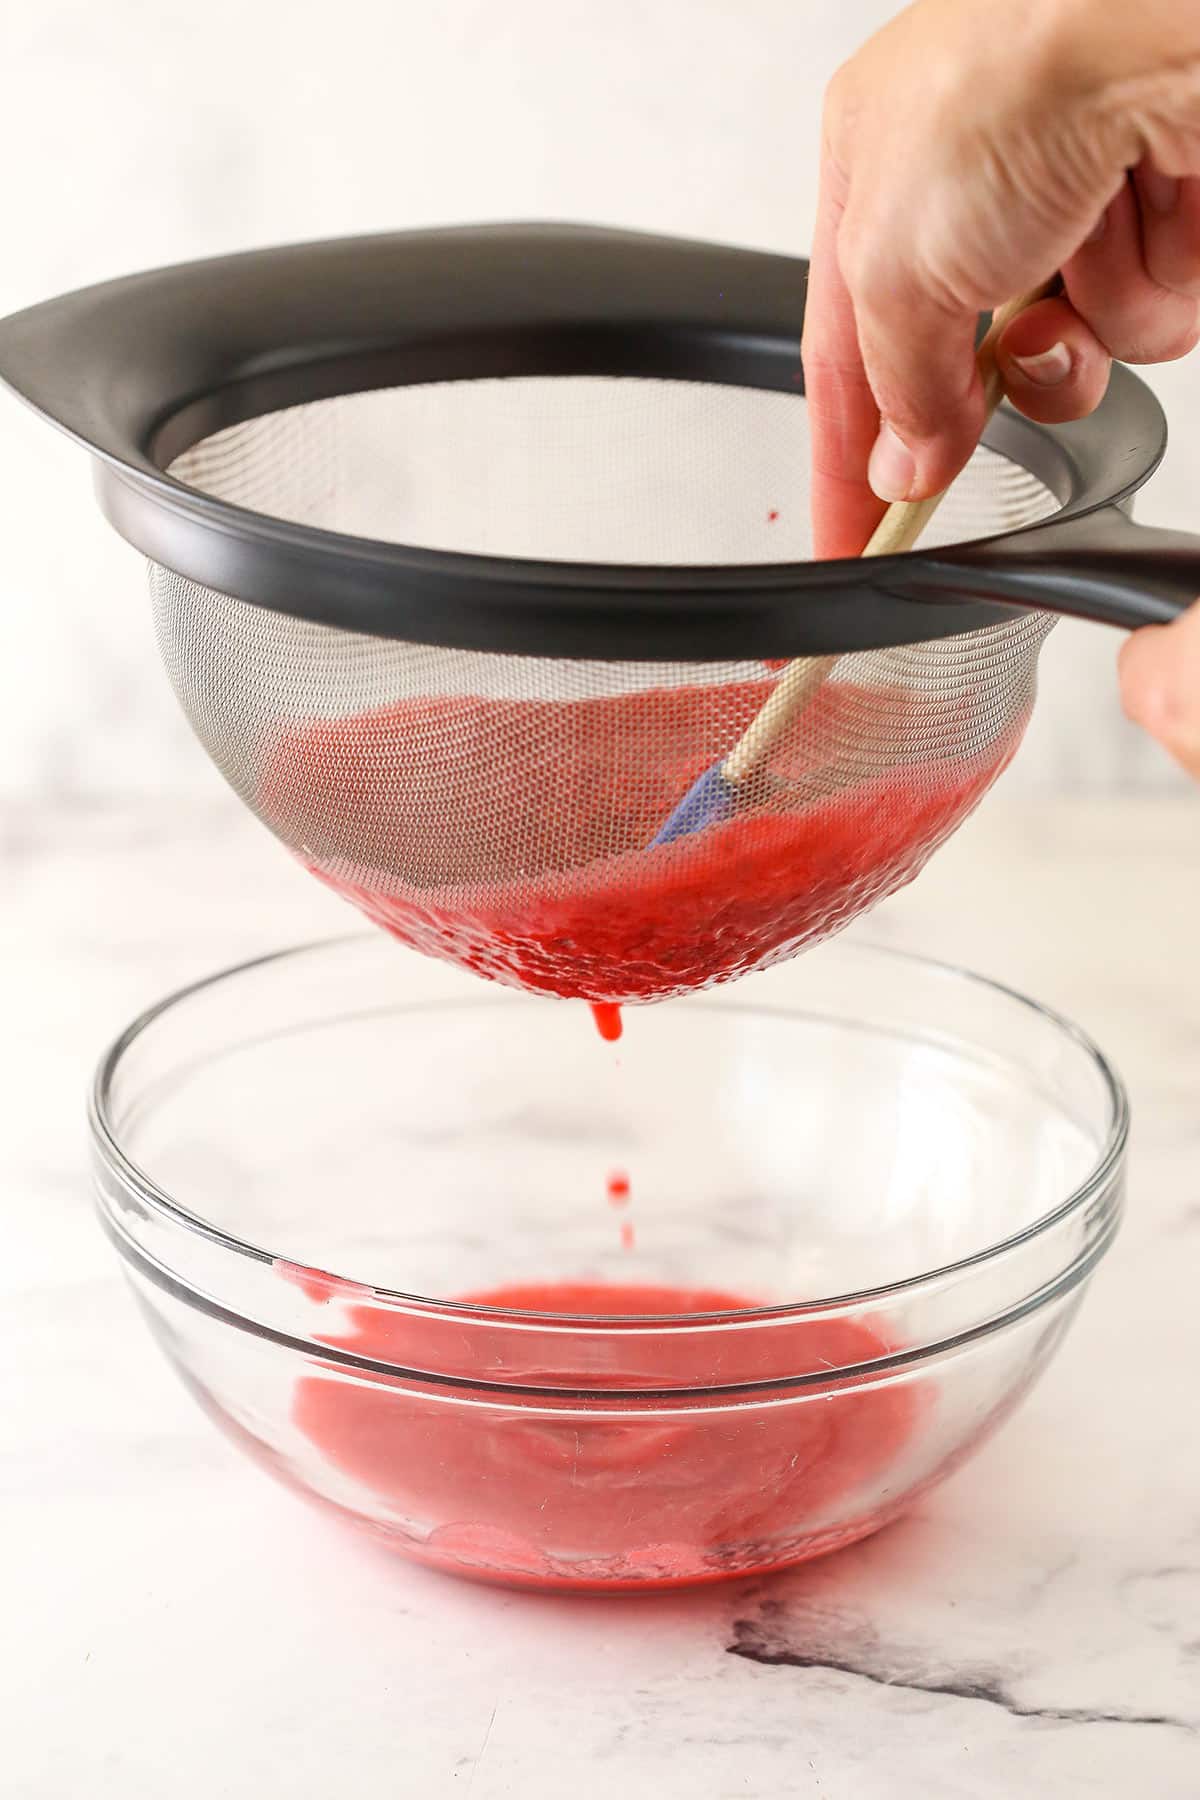 Straining the raspberry puree into a bowl.